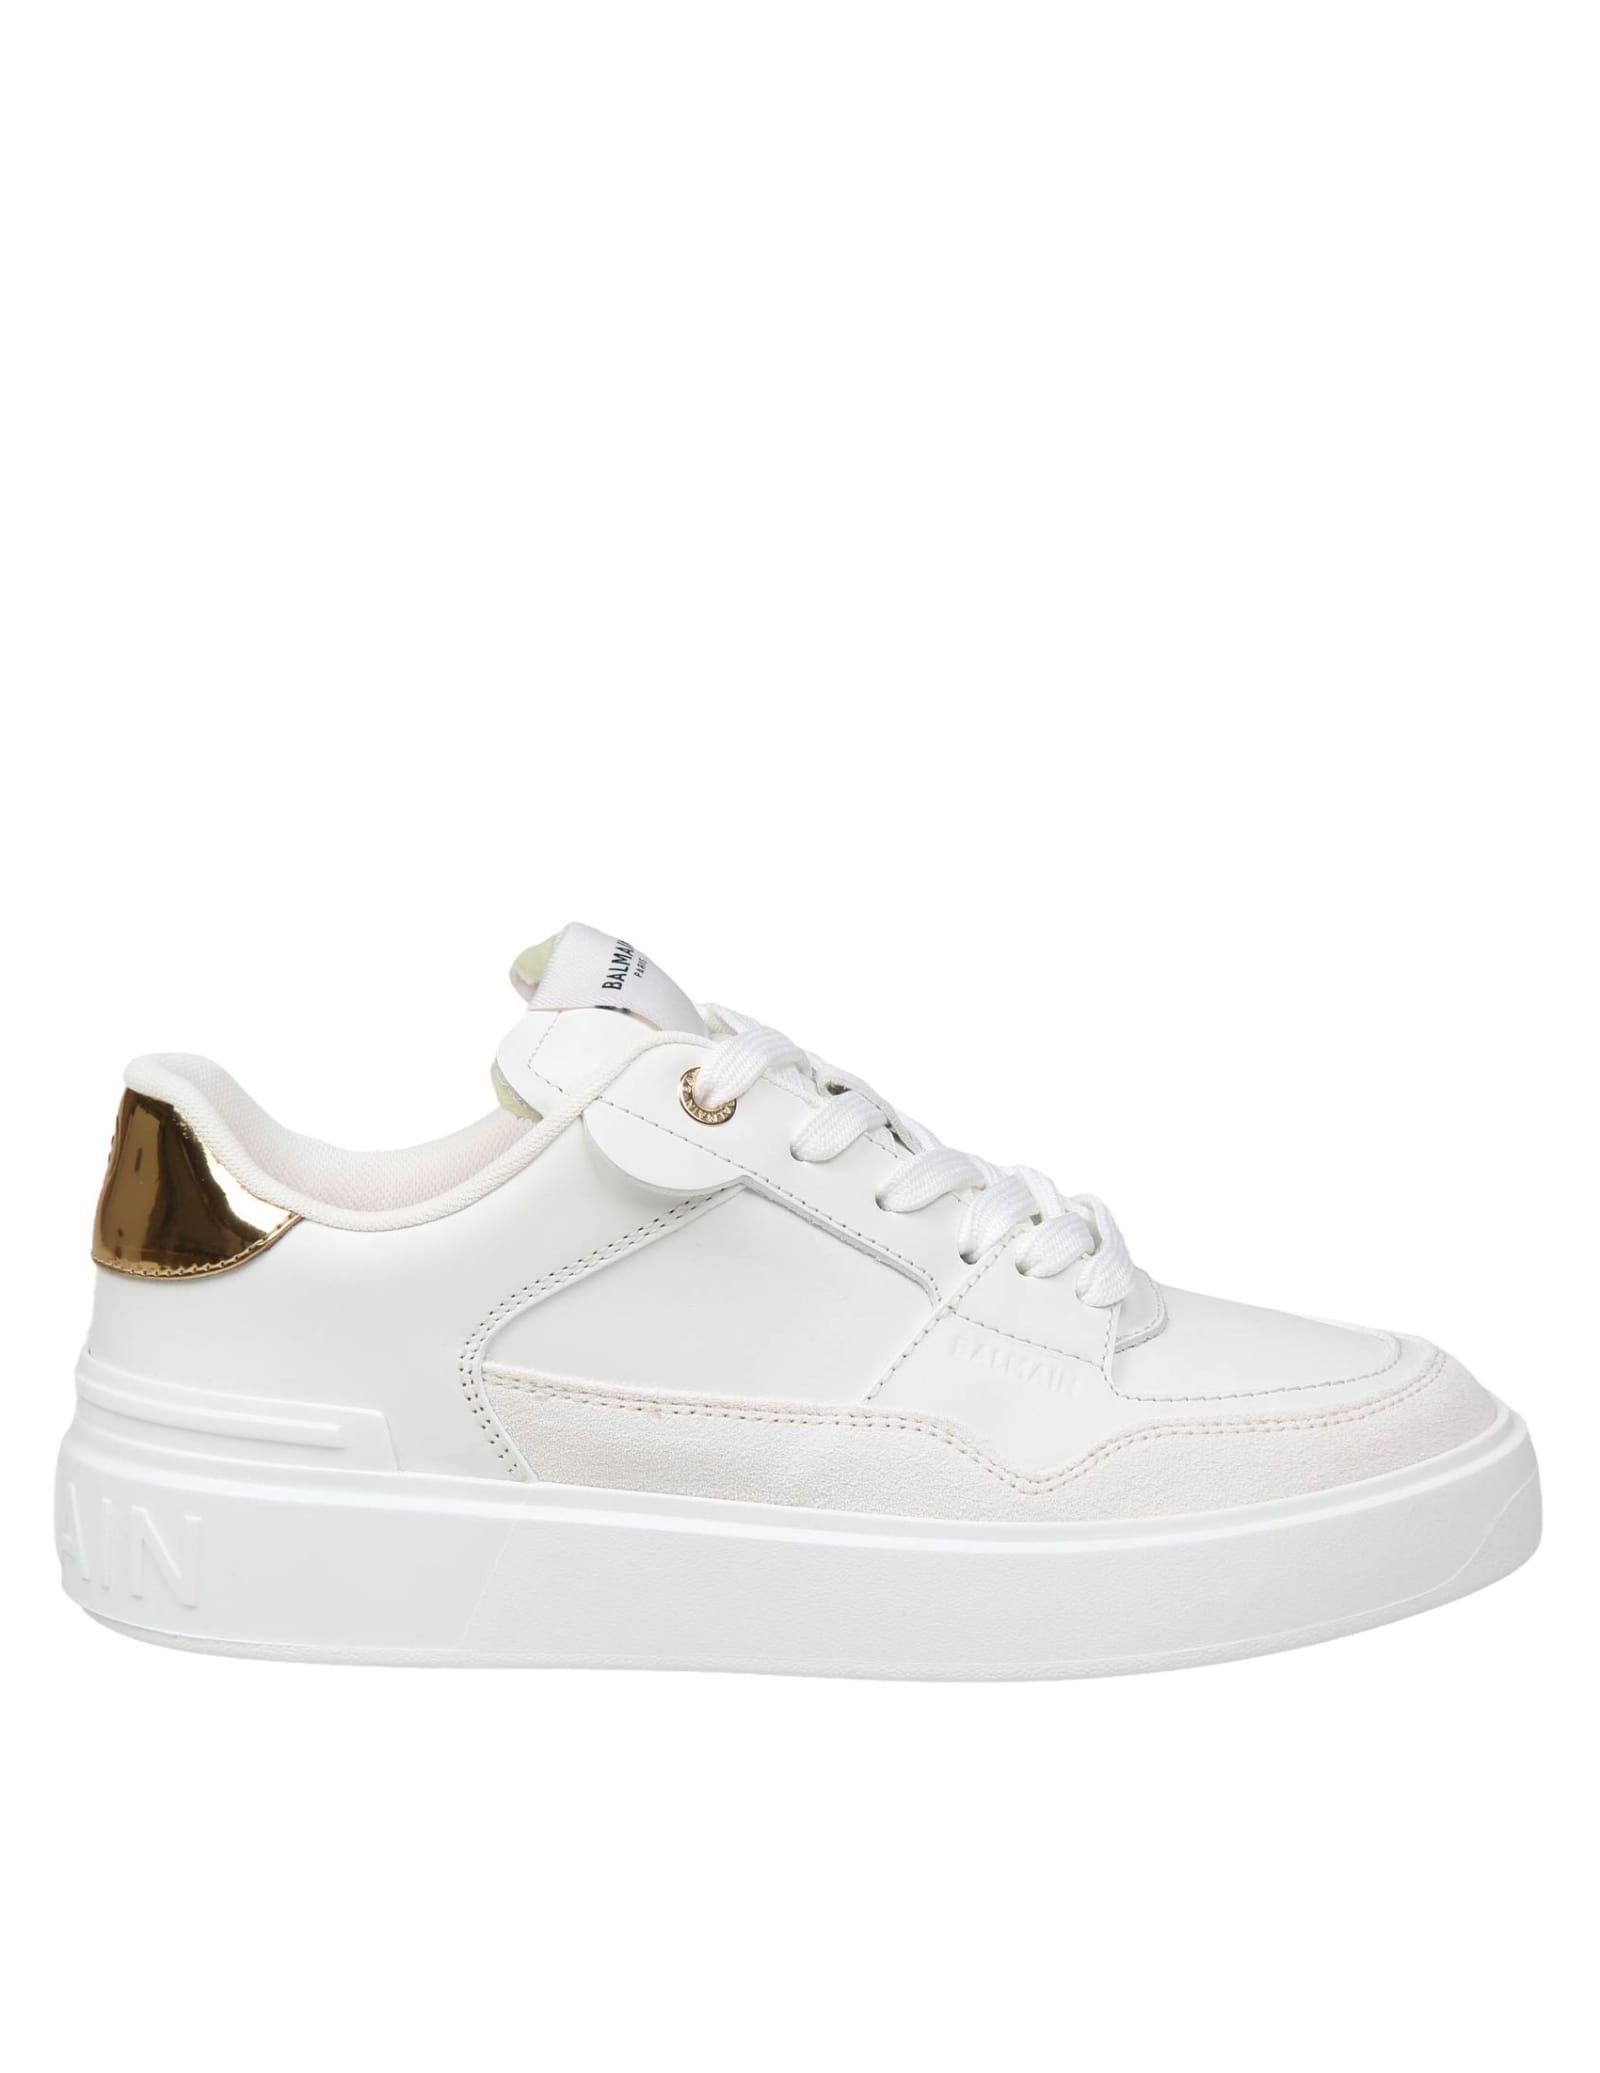 B- Court Flip Sneakers In White And Gold Leather